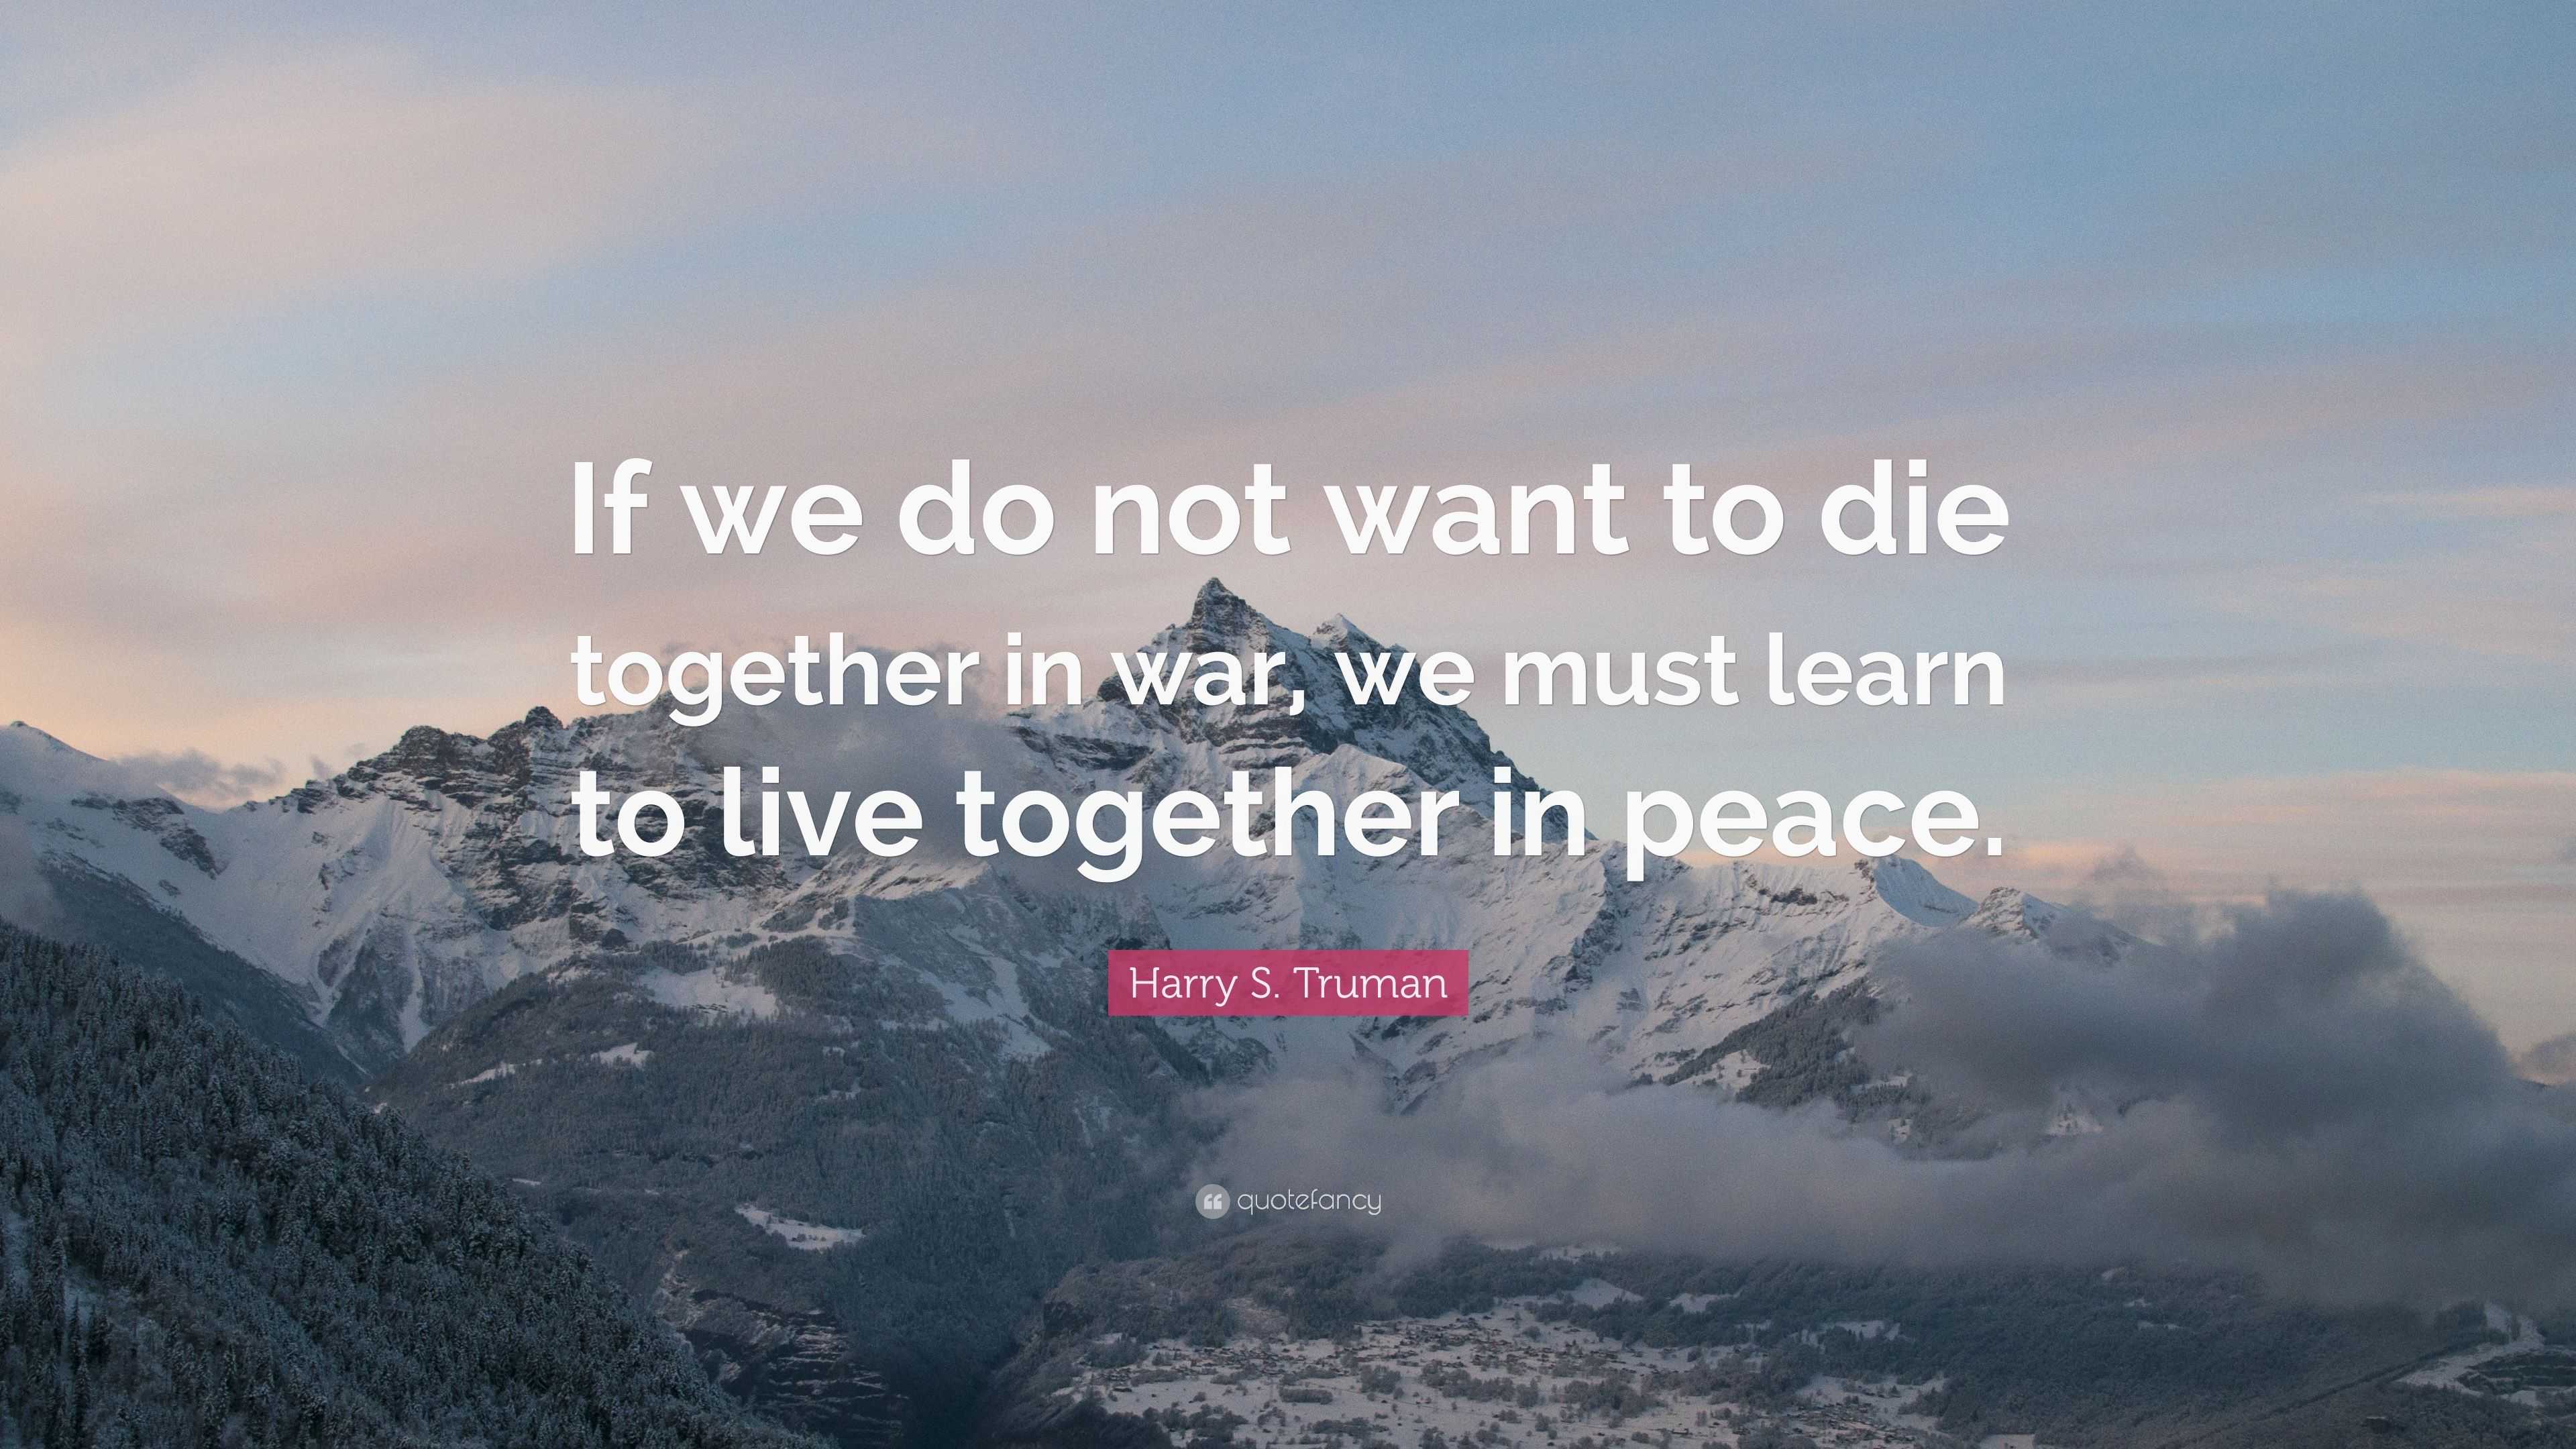 Harry S. Truman Quote: “If we do not want to die together in war, we ...